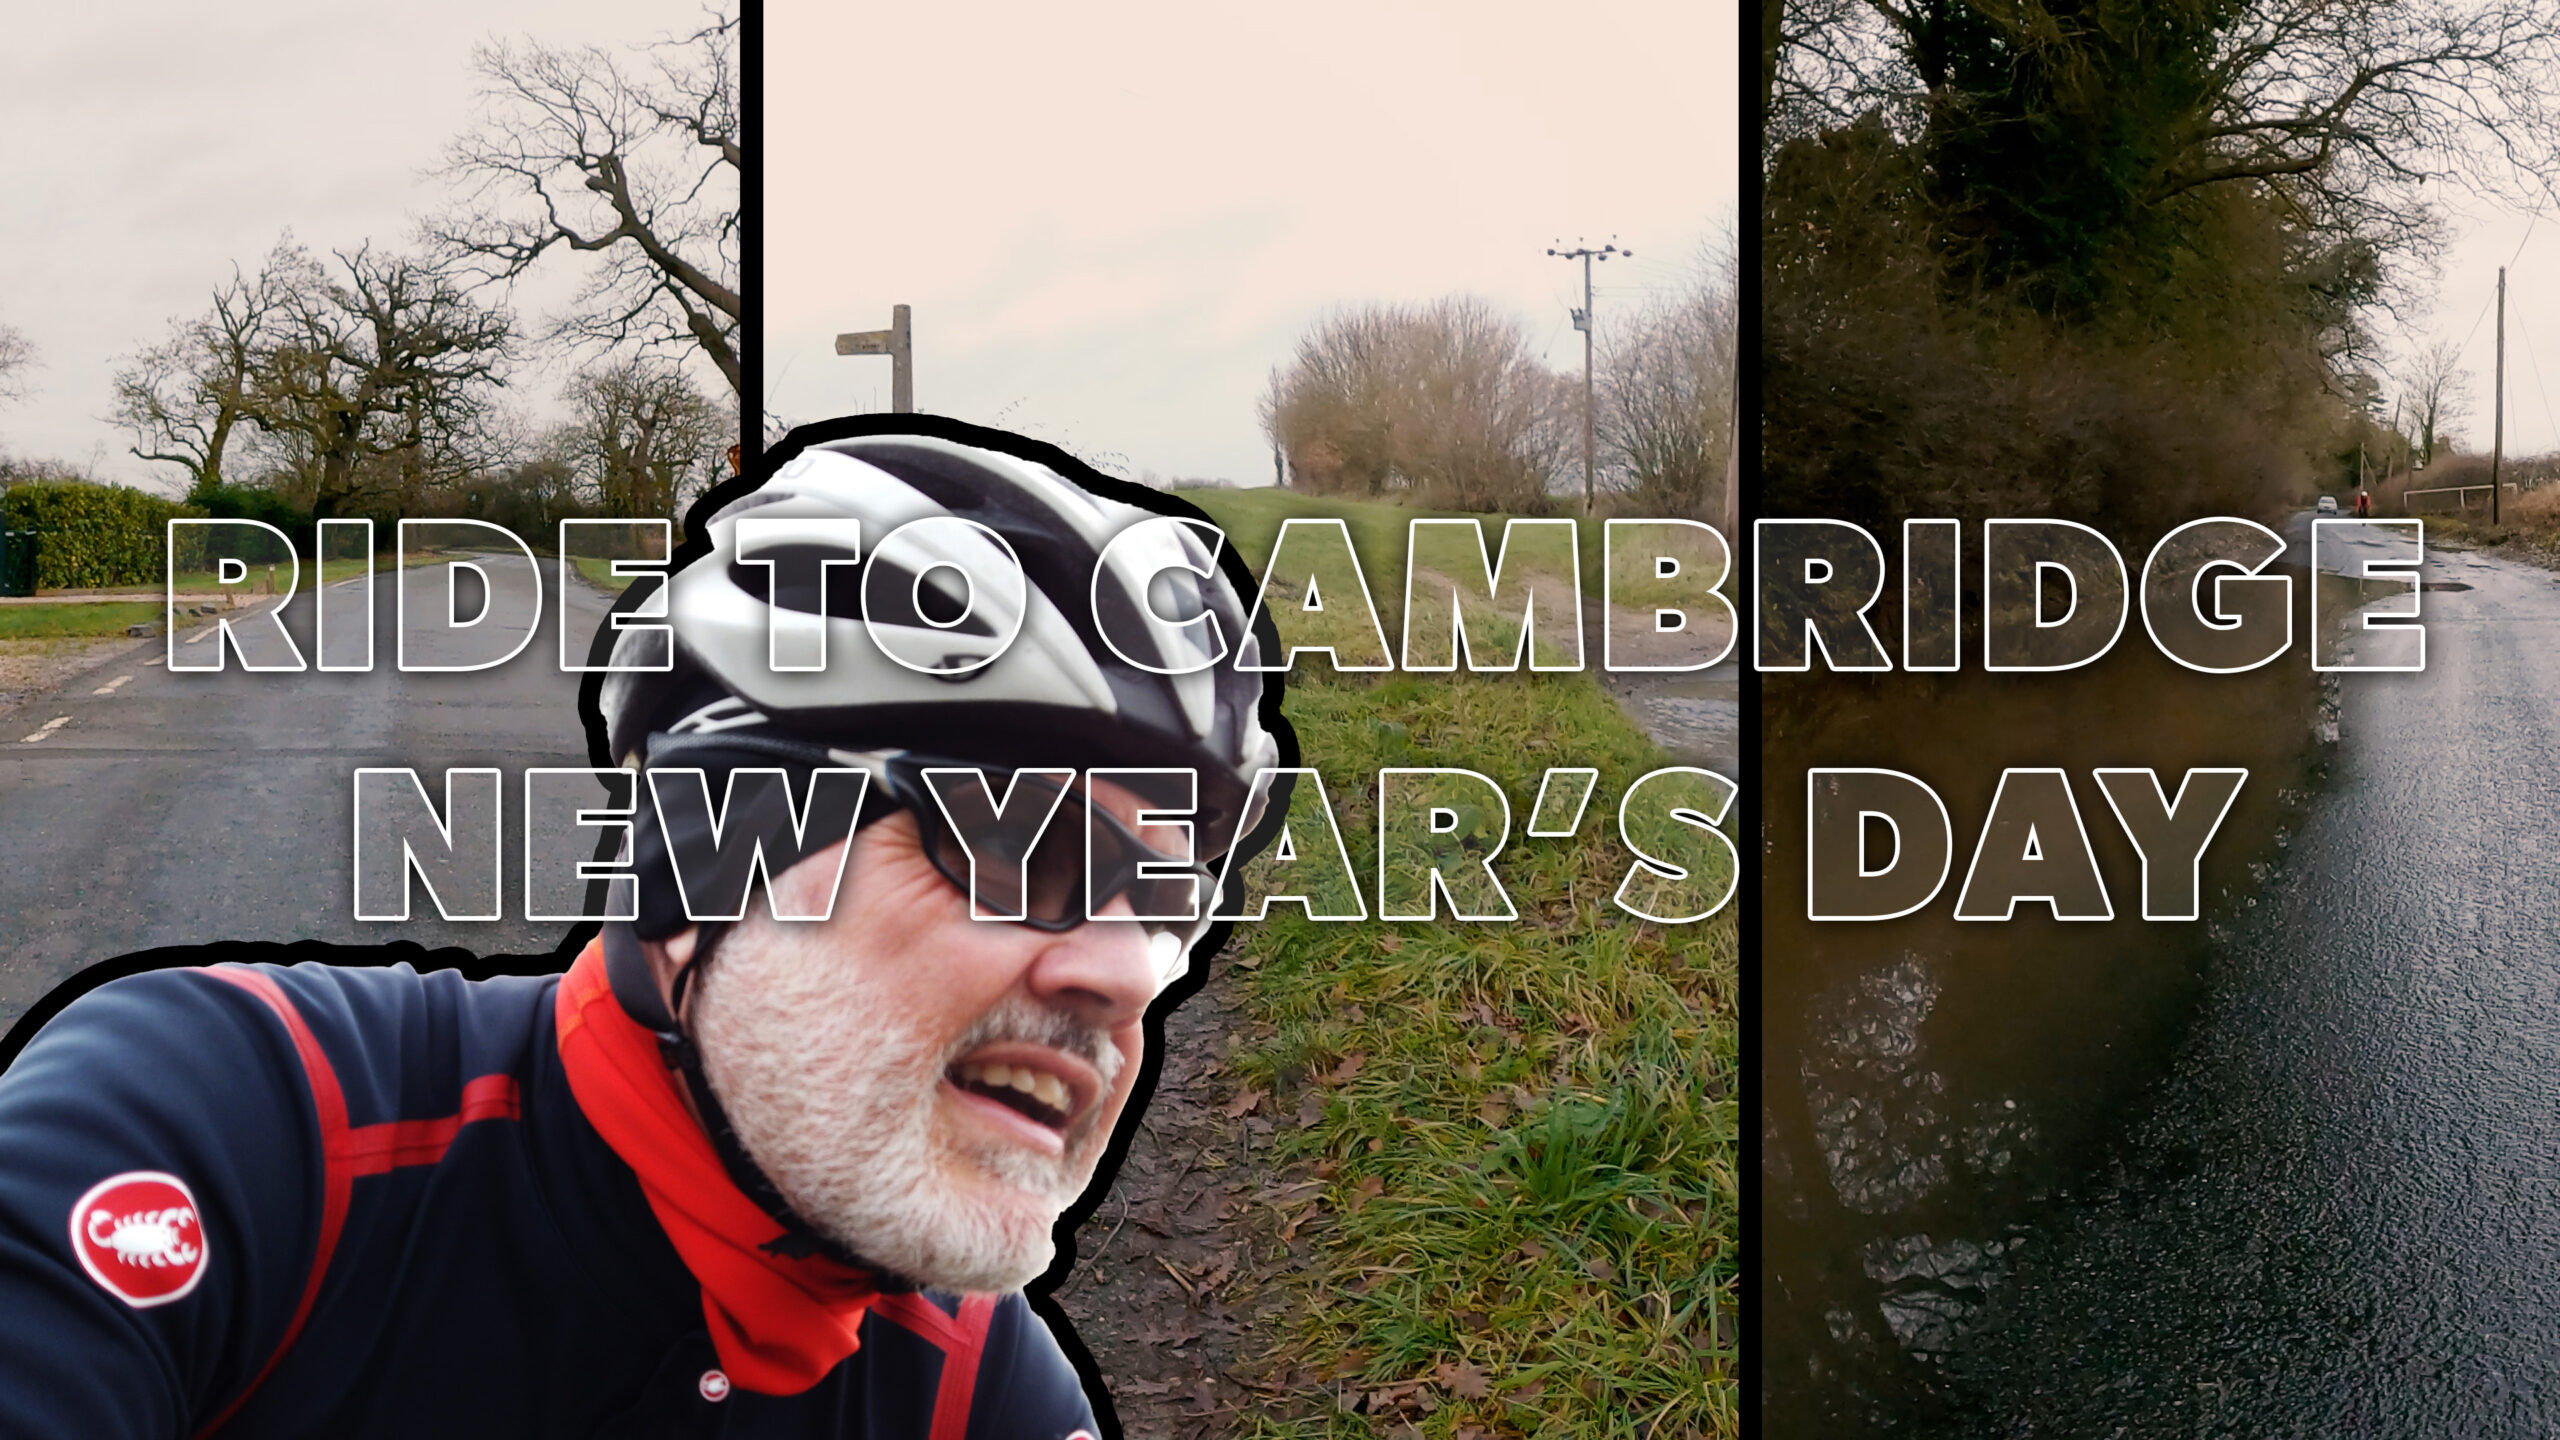 A New Year’s Day Ride to Cambridge